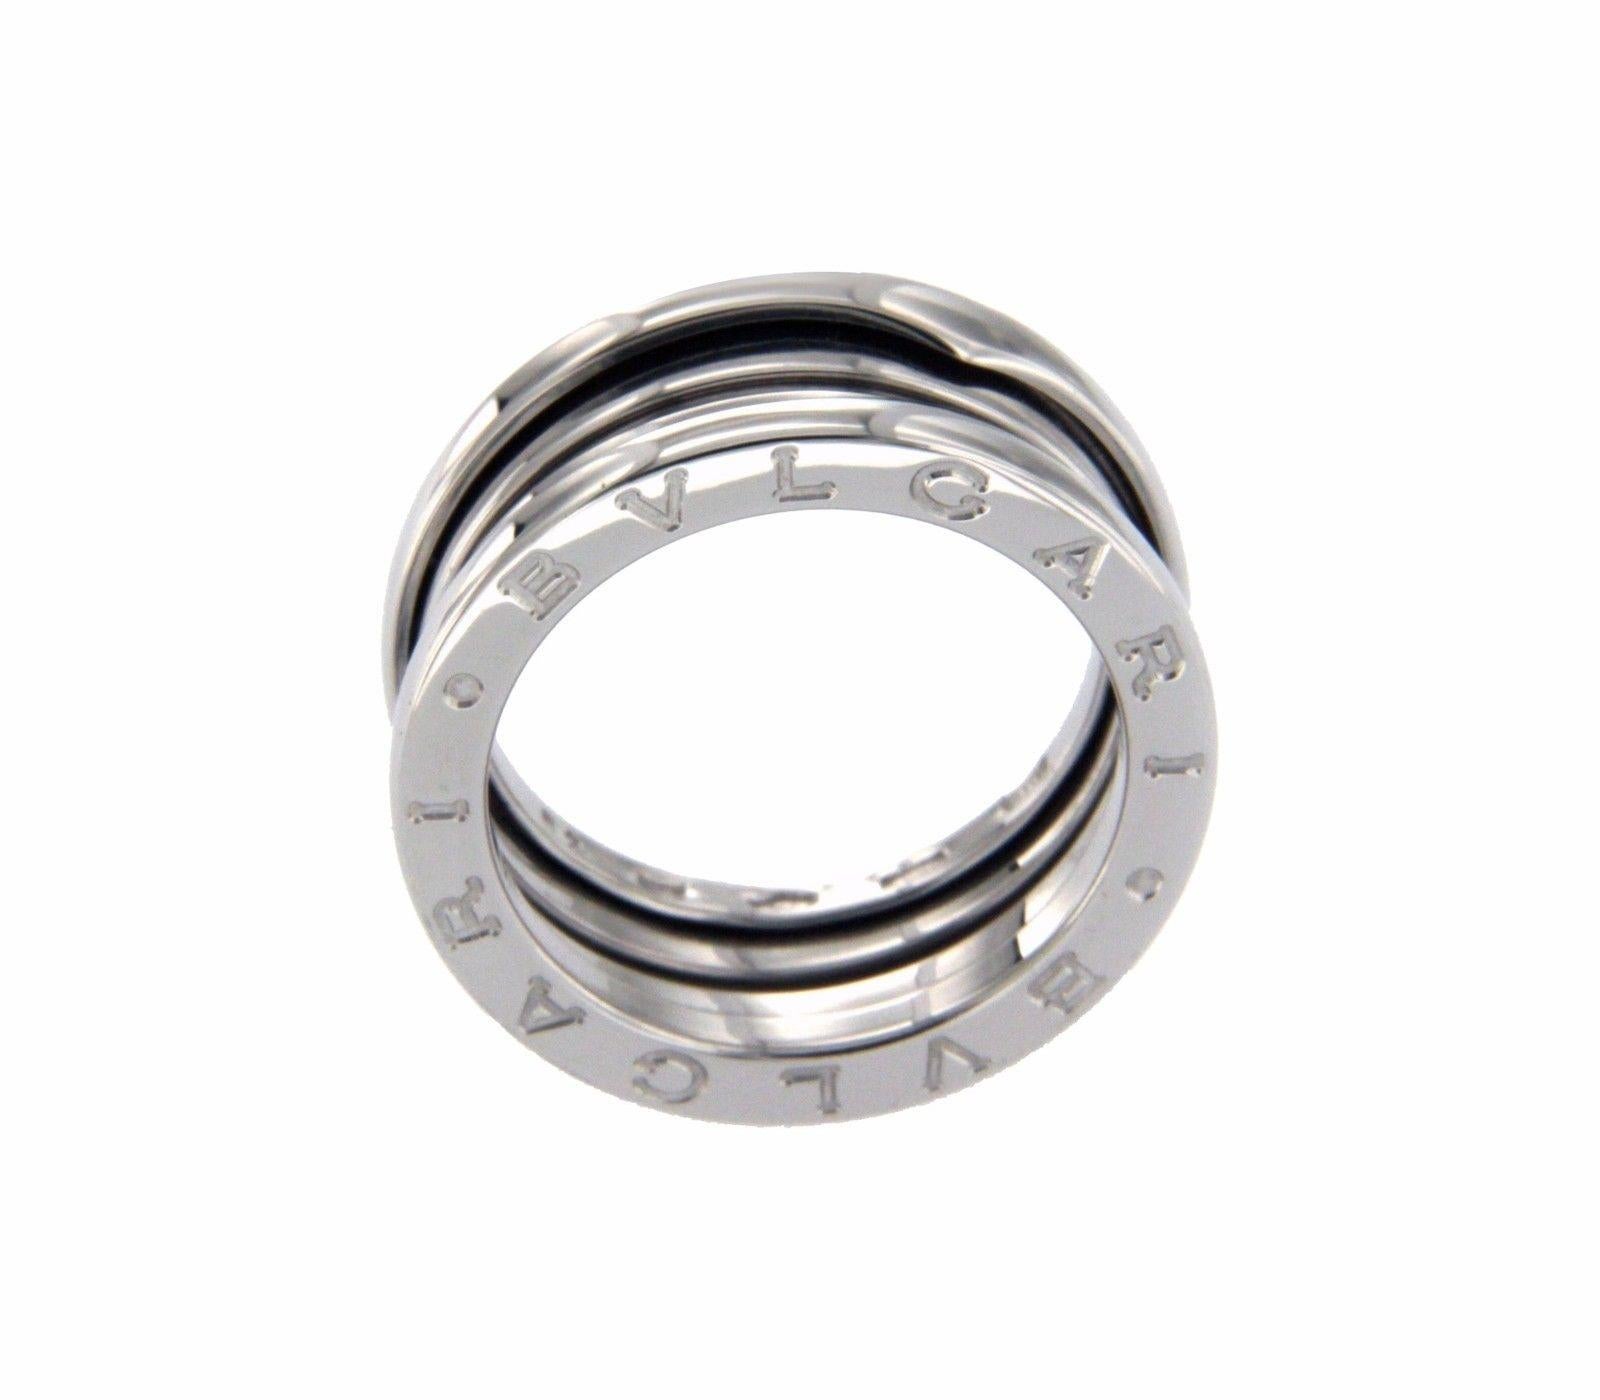 Type: Ring
Top: 8 mm
Band Width: 8 mm
Metal: White Gold
Metal Purity: 18K
Hallmarks: Bvlgari Italy 750 51
Total Weight: 9.2 Grams
Stone Type: None
Condition: Pre-owned
Stock Number: U319